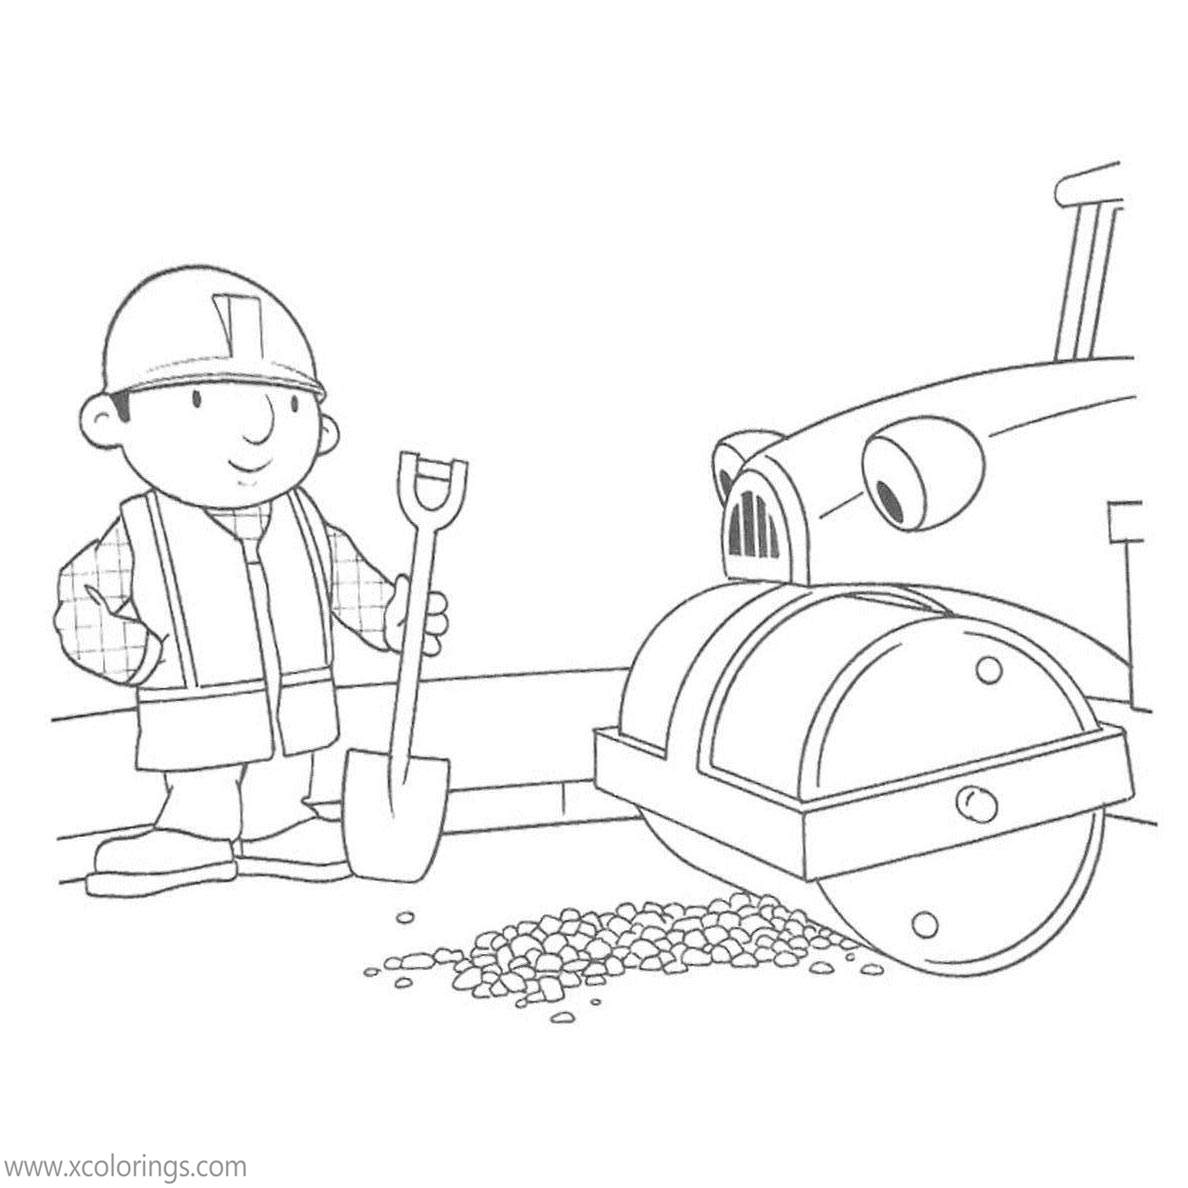 Free Bob the Builder Coloring Pages Roley is Working with Bob printable